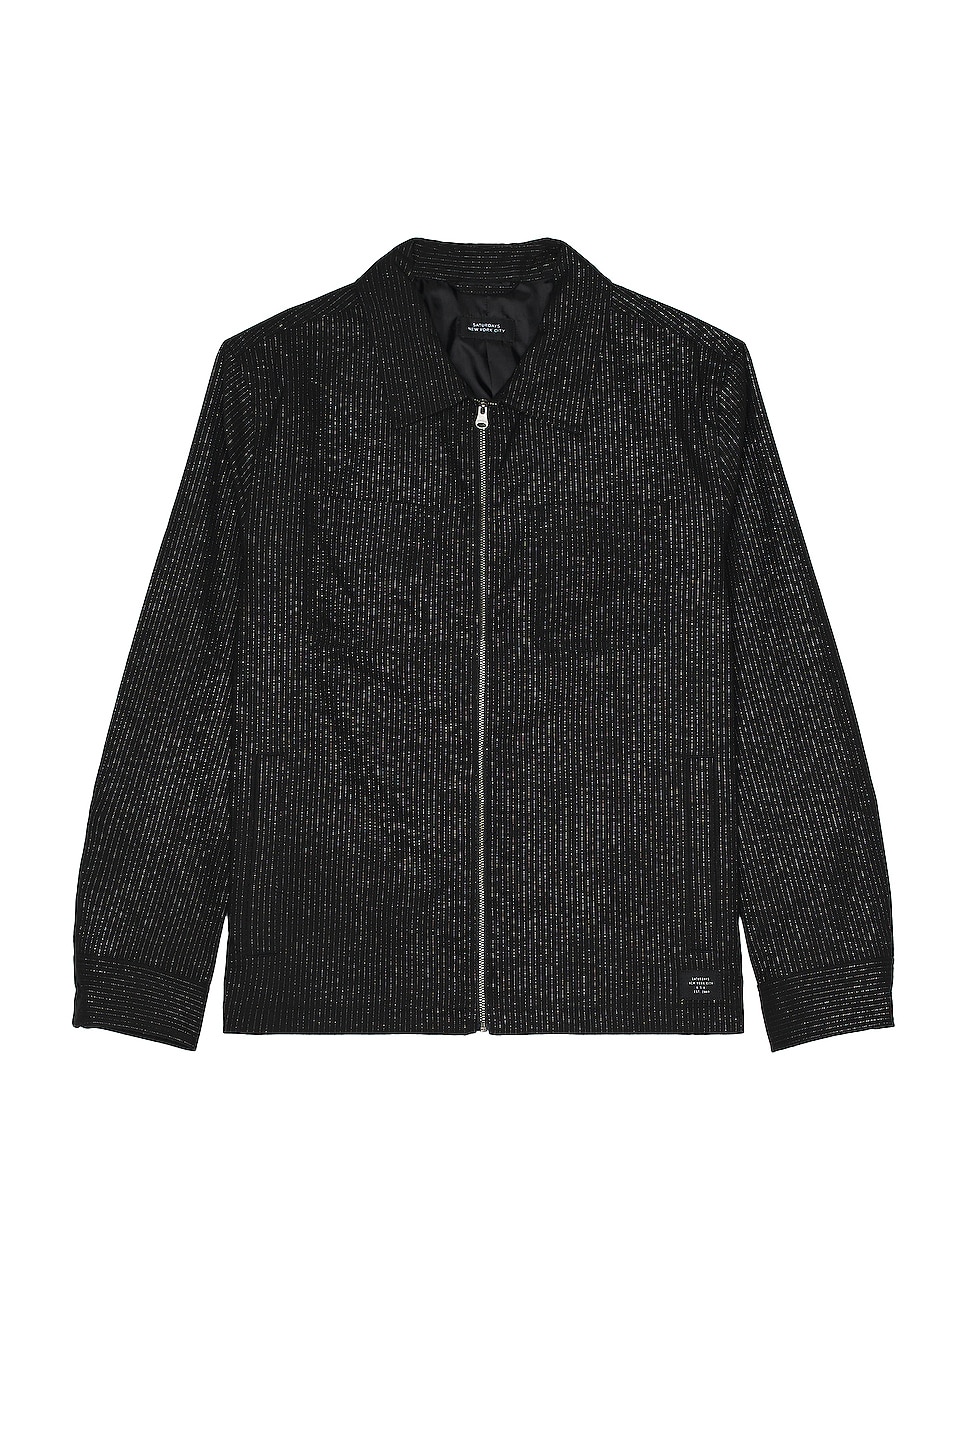 Image 1 of SATURDAYS NYC Flores Suiting Shirt Jacket in Black